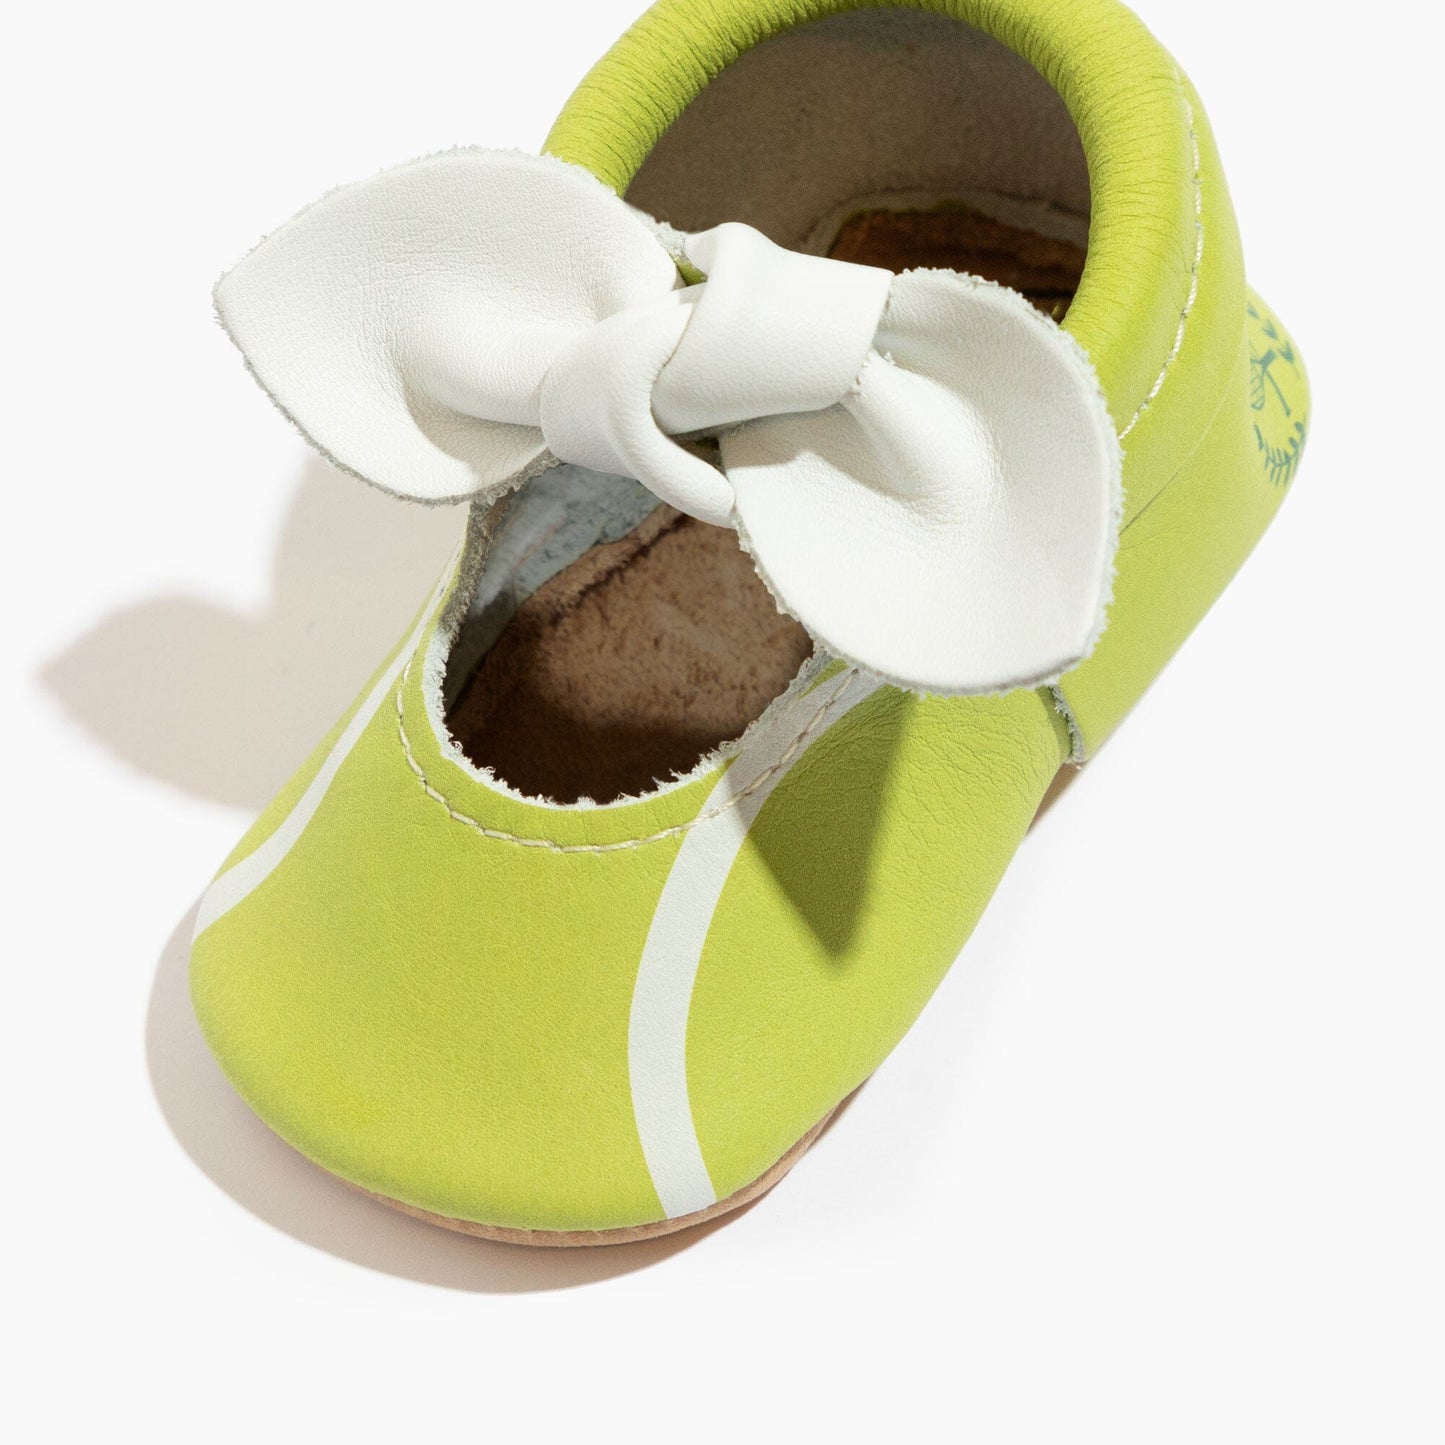 Tennis Match Knotted Bow Baby Shoe Knotted Bow Mocc Soft Sole 